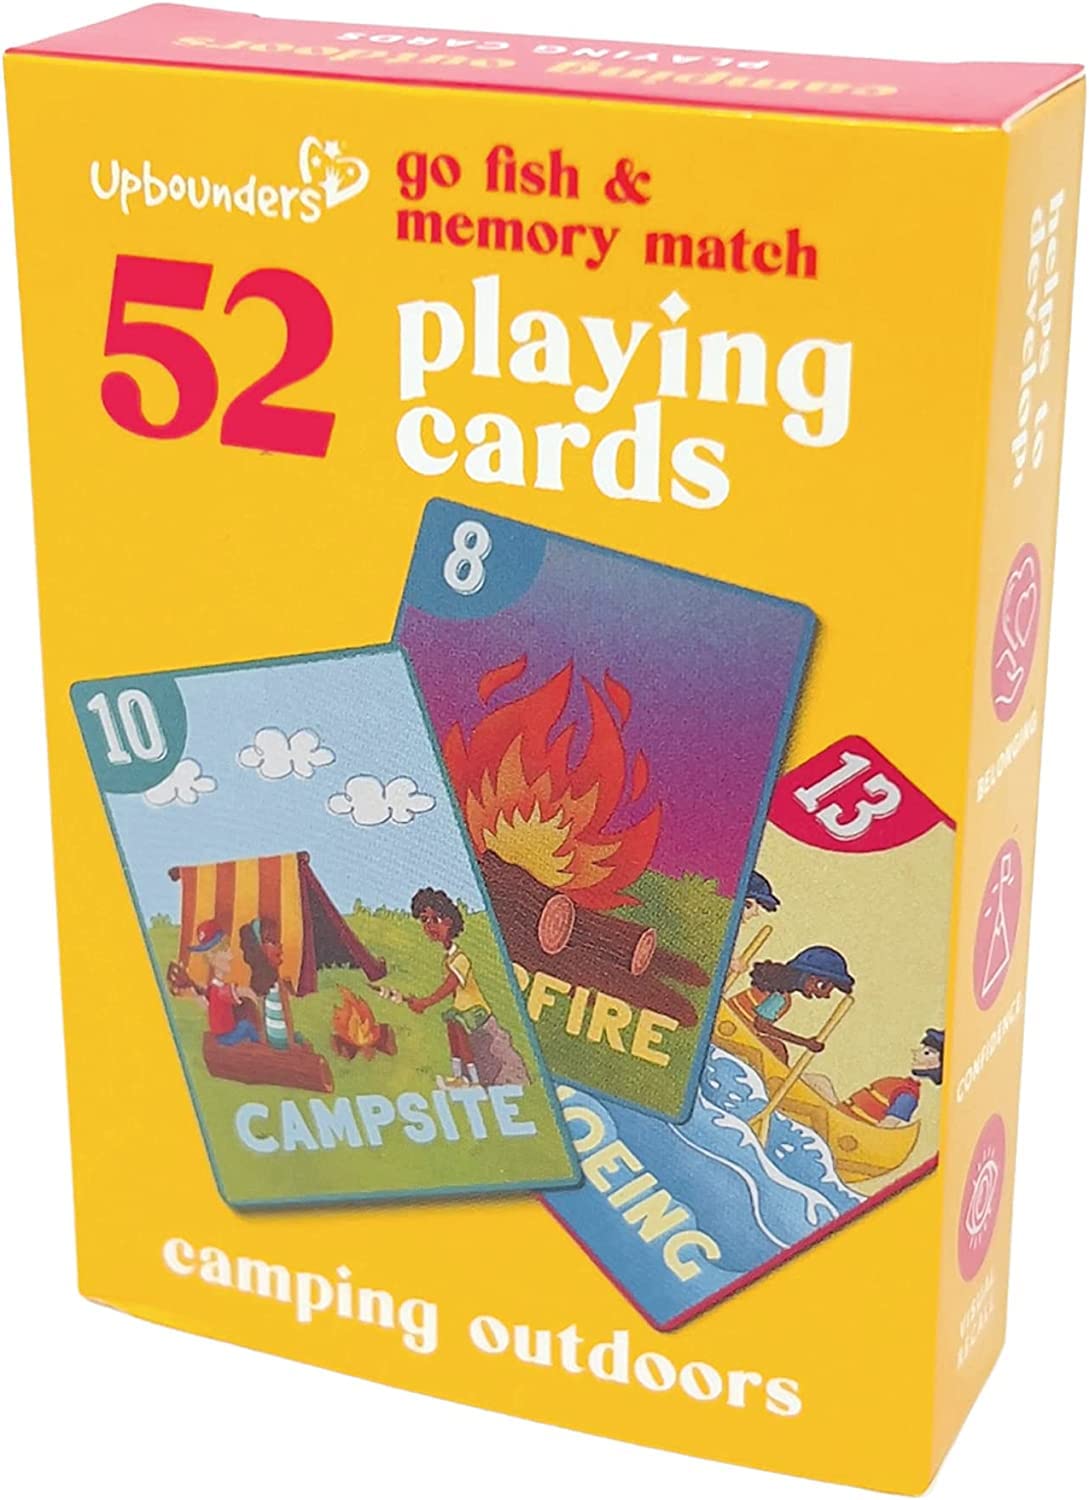 Upbounders by Little Likes Kids - Camping Outdoors Go Fish! Card Game - Classic Family Game for Kids Toddlers Preschool - Diverse, Multicultural Matching Pairs Game